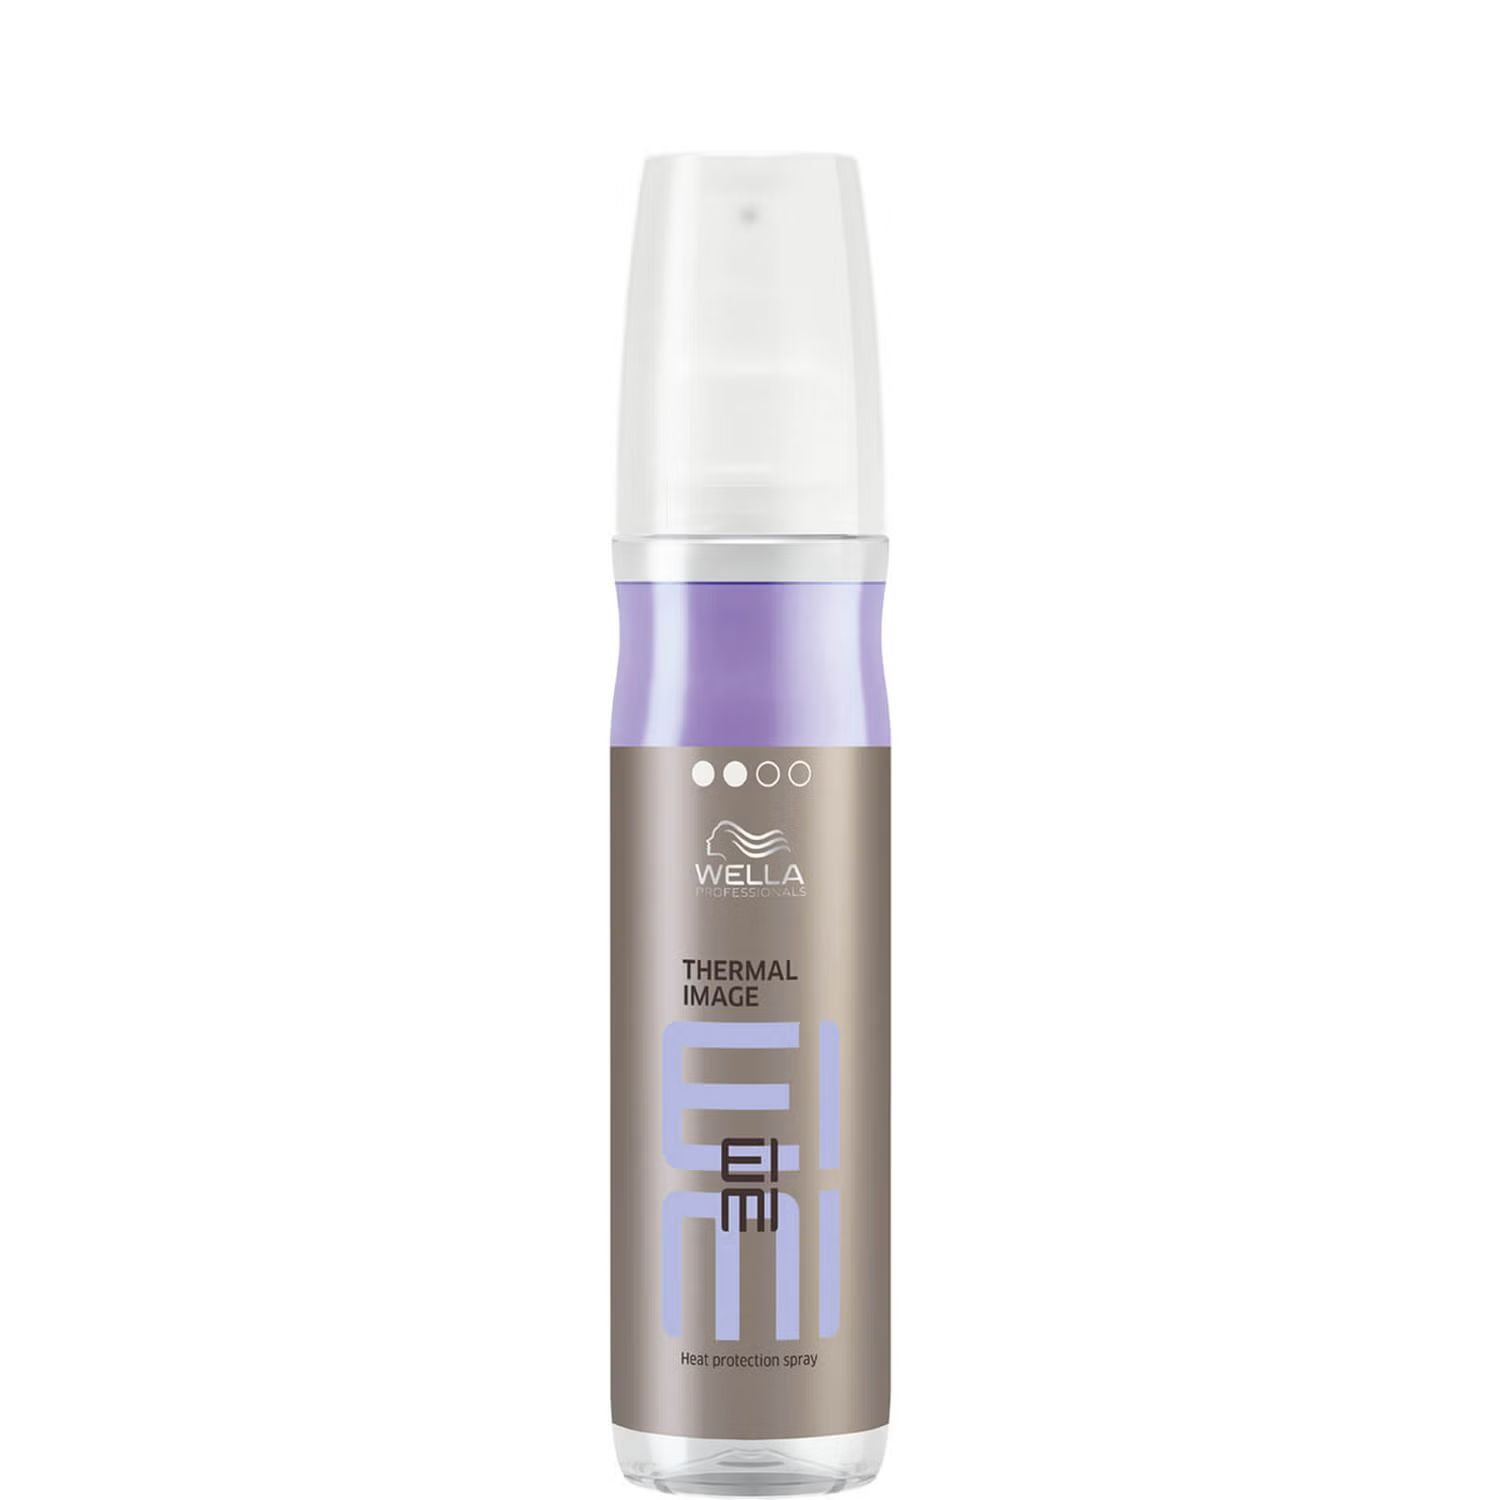 Wella Professionals EIMI Thermal Image Heat Protection Spray 150ml | Look Fantastic (ROW)